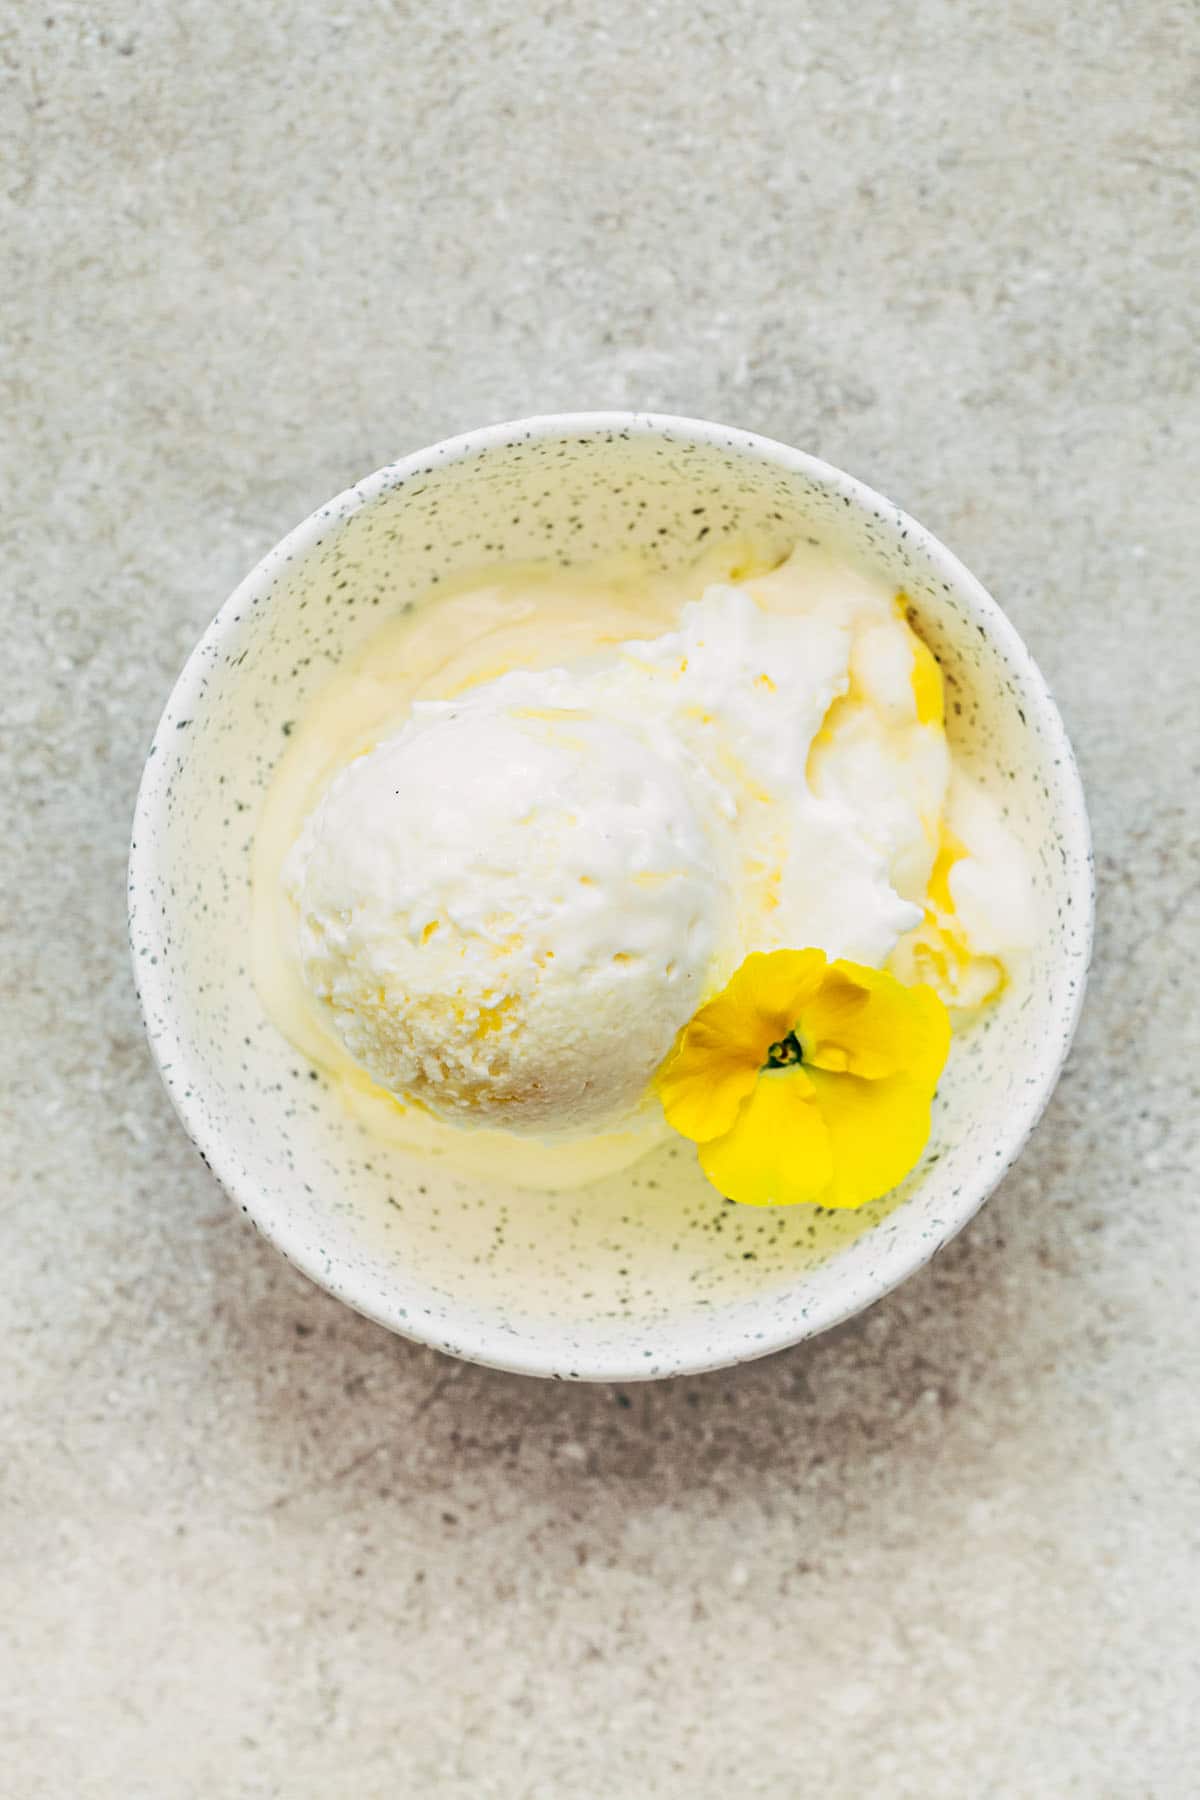 A small dish of ice cream garnished with a yellow pansy.